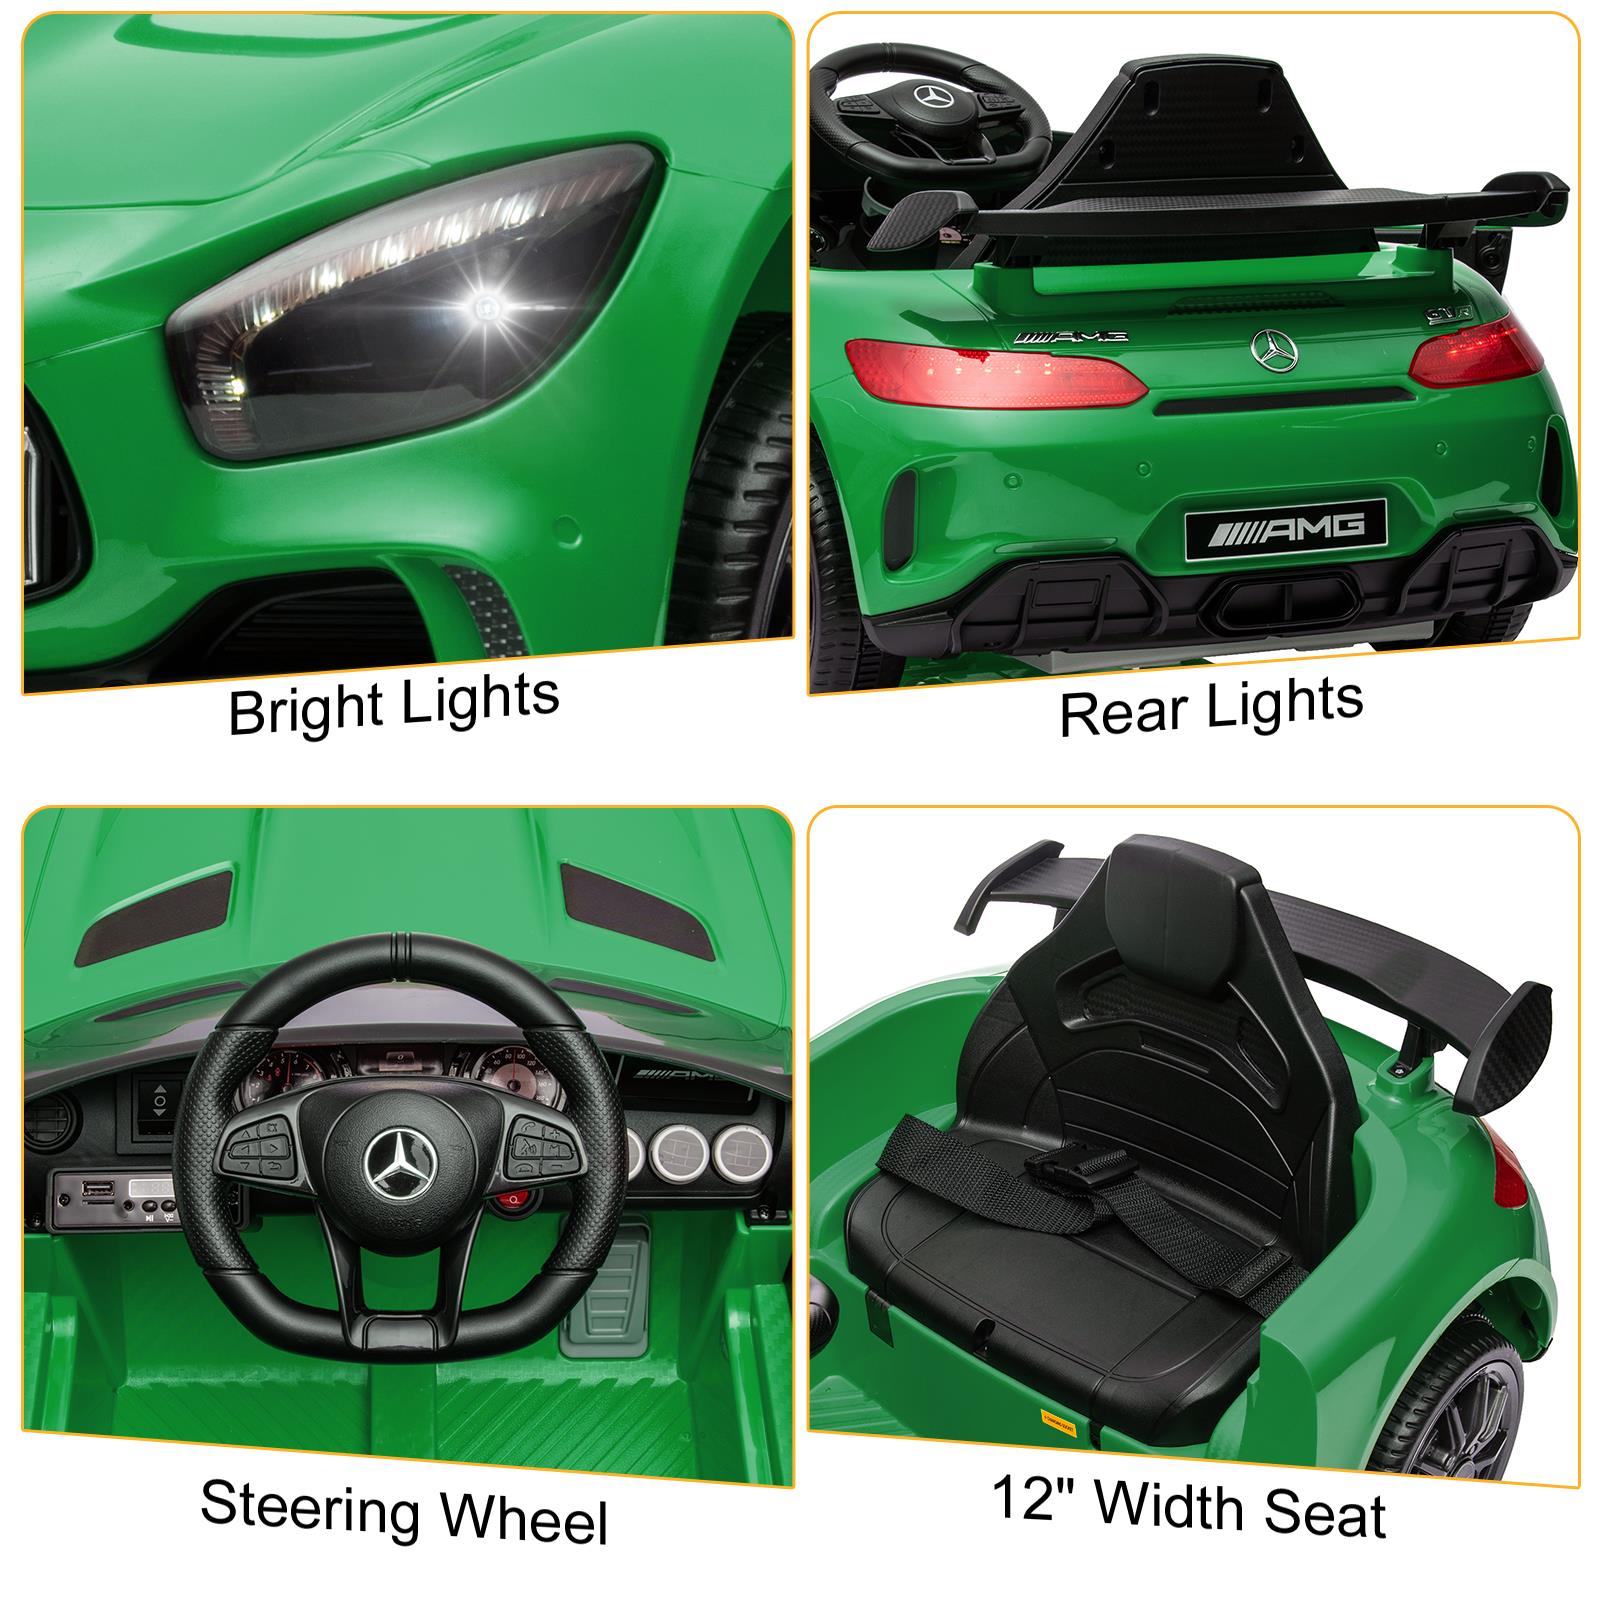 UBesGoo 12V Licensed Mercedes-Benz Electric Ride on Car Toy for Toddler Kid w/ Remote Control, LED Lights, Green - image 5 of 9